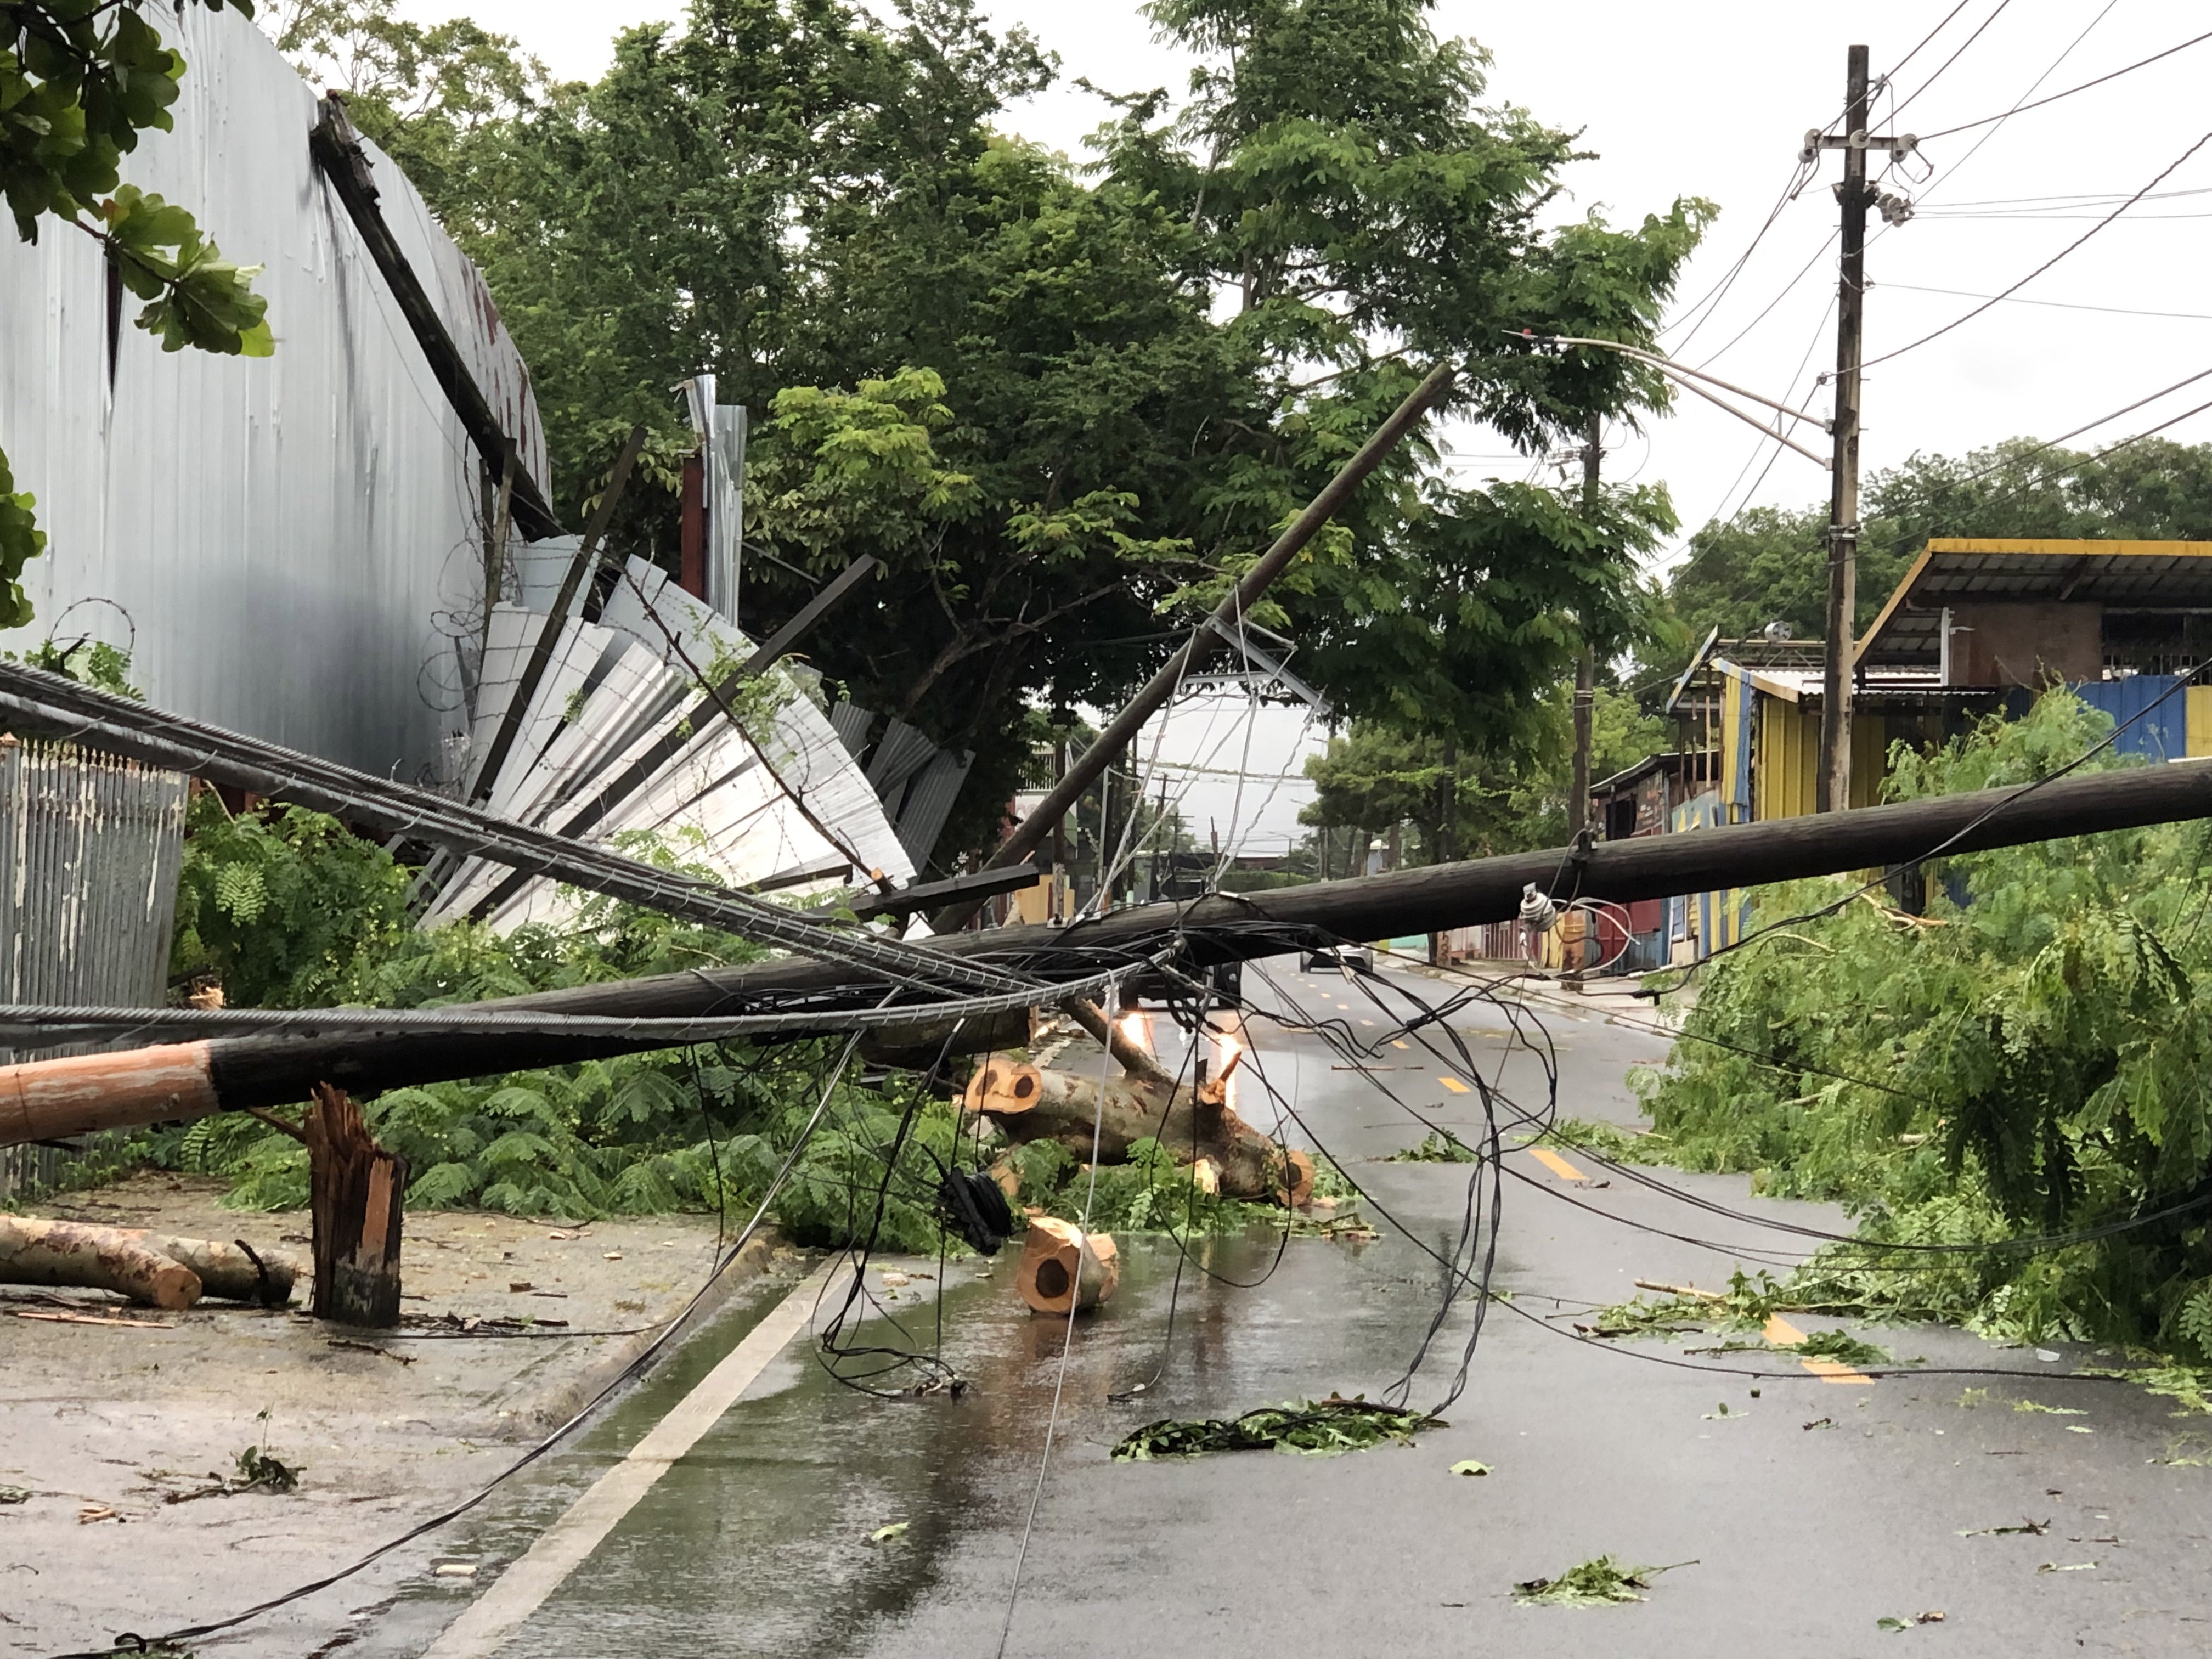 A downed power line near San Juan, Puerto Rico. The entire island lost power today as the hurricane swept through